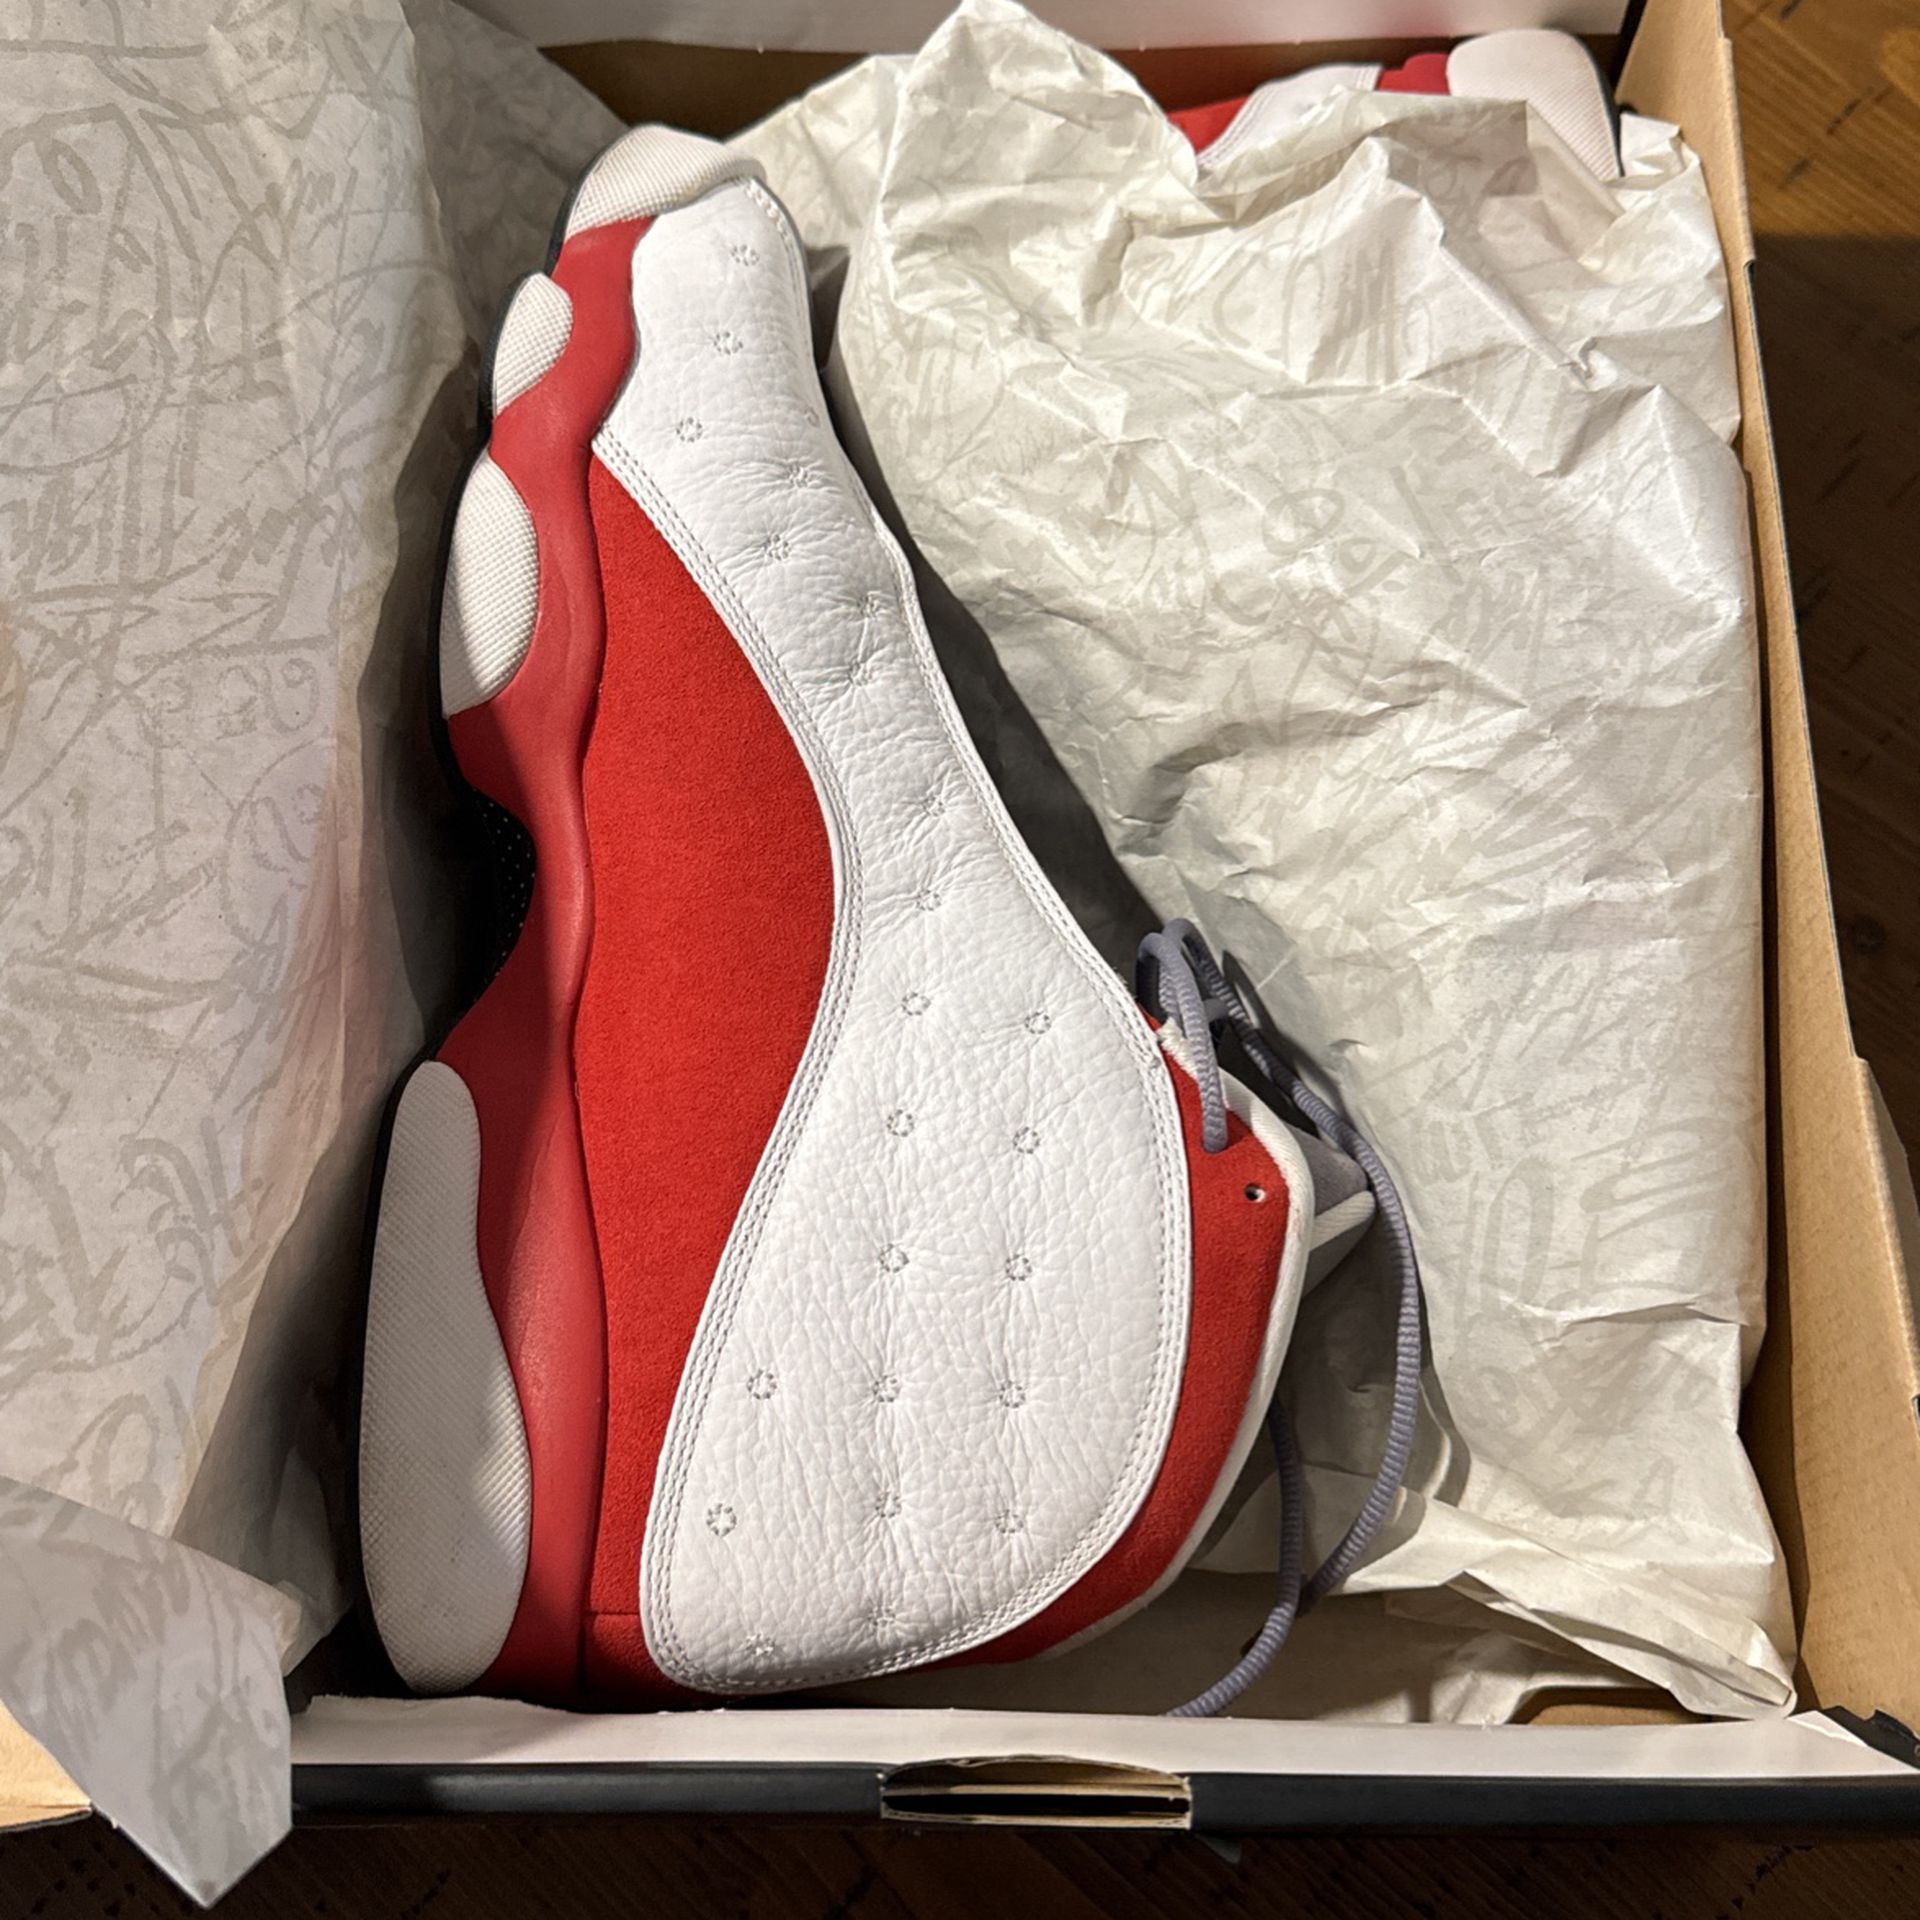 Jordan 13 White / Red Cement Grey Size 10 Lightly Used $160